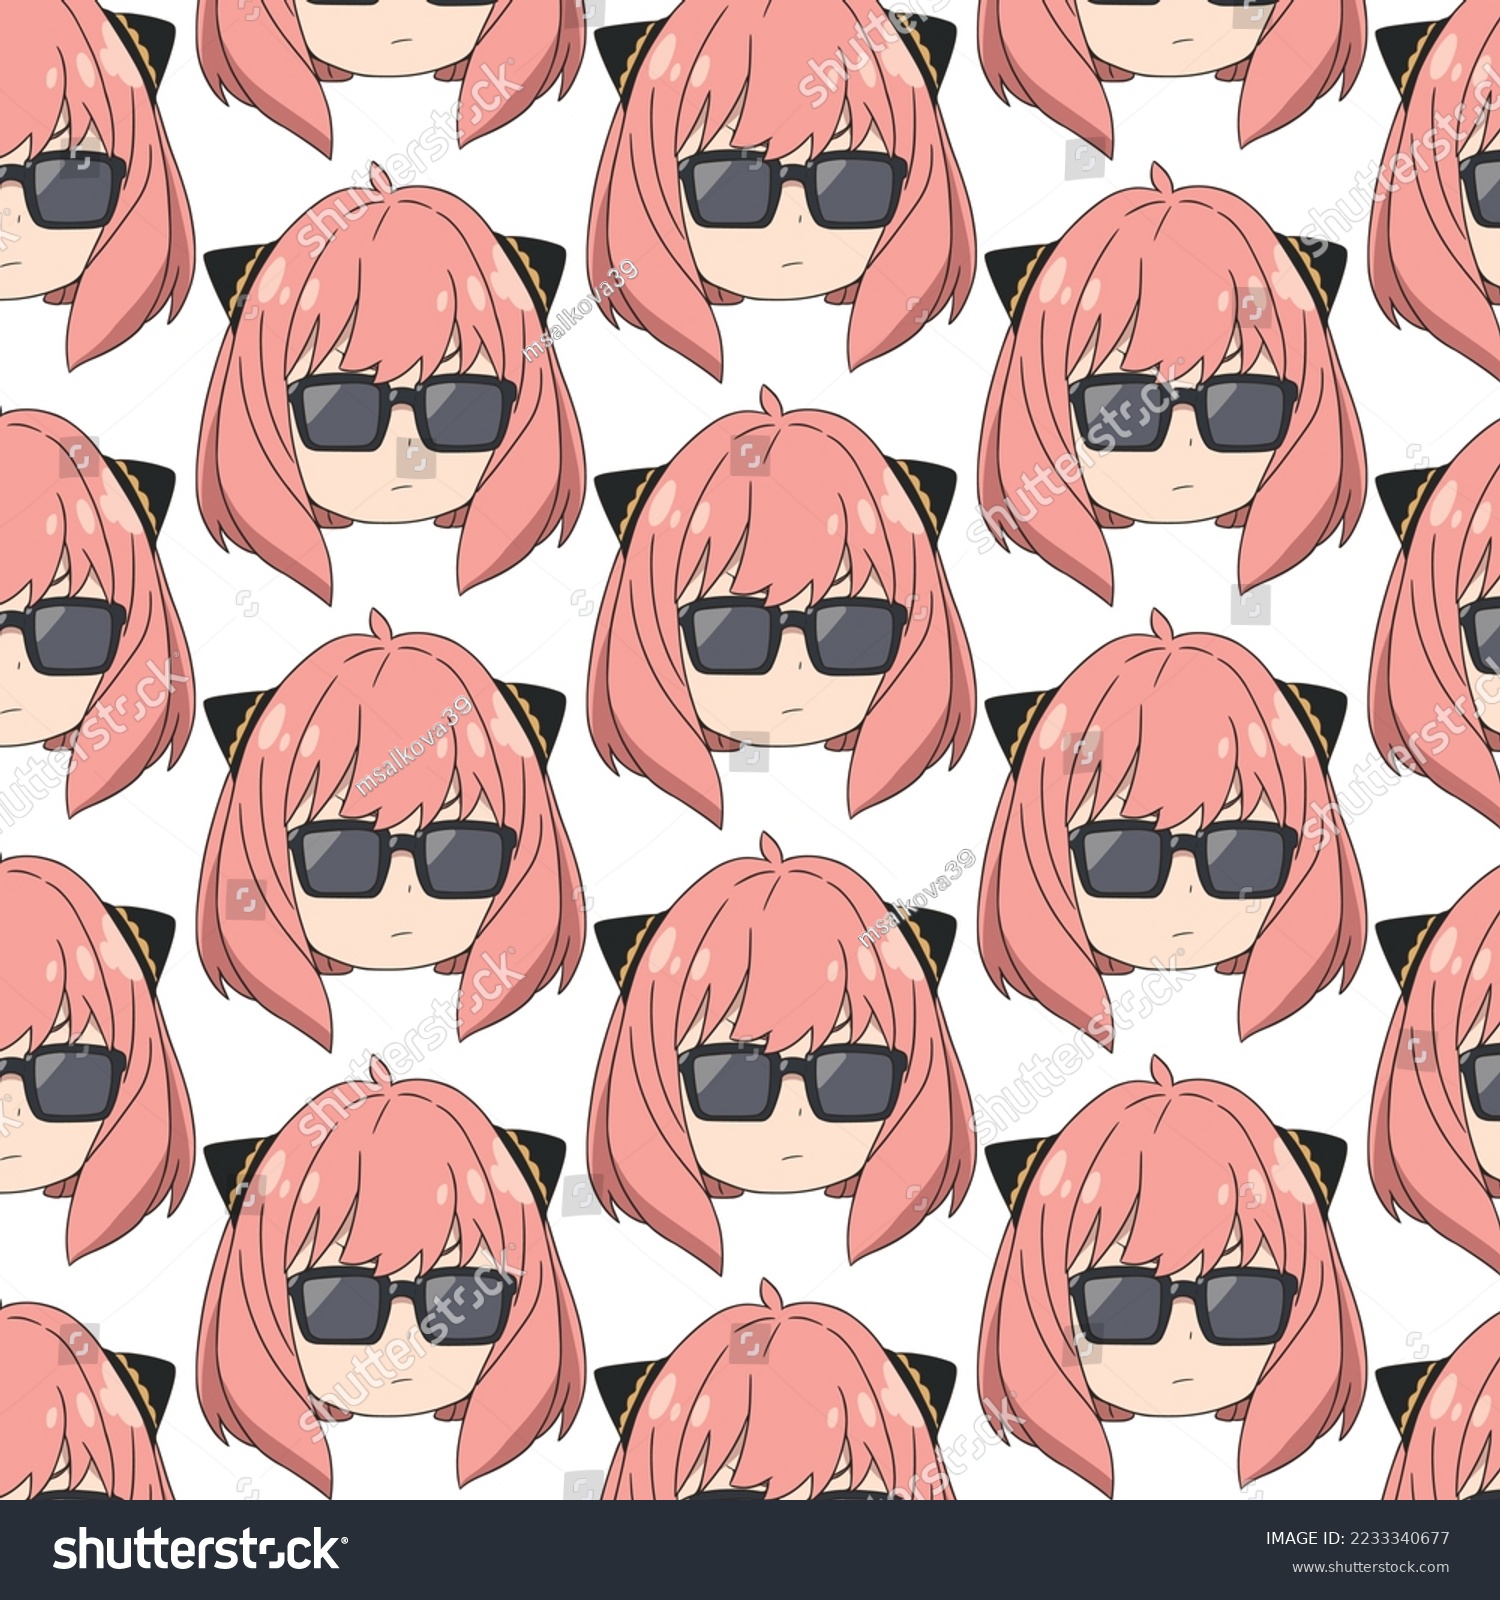 SVG of Girl with lush pink hair wearing glasses, not smiling, head only, pattern svg